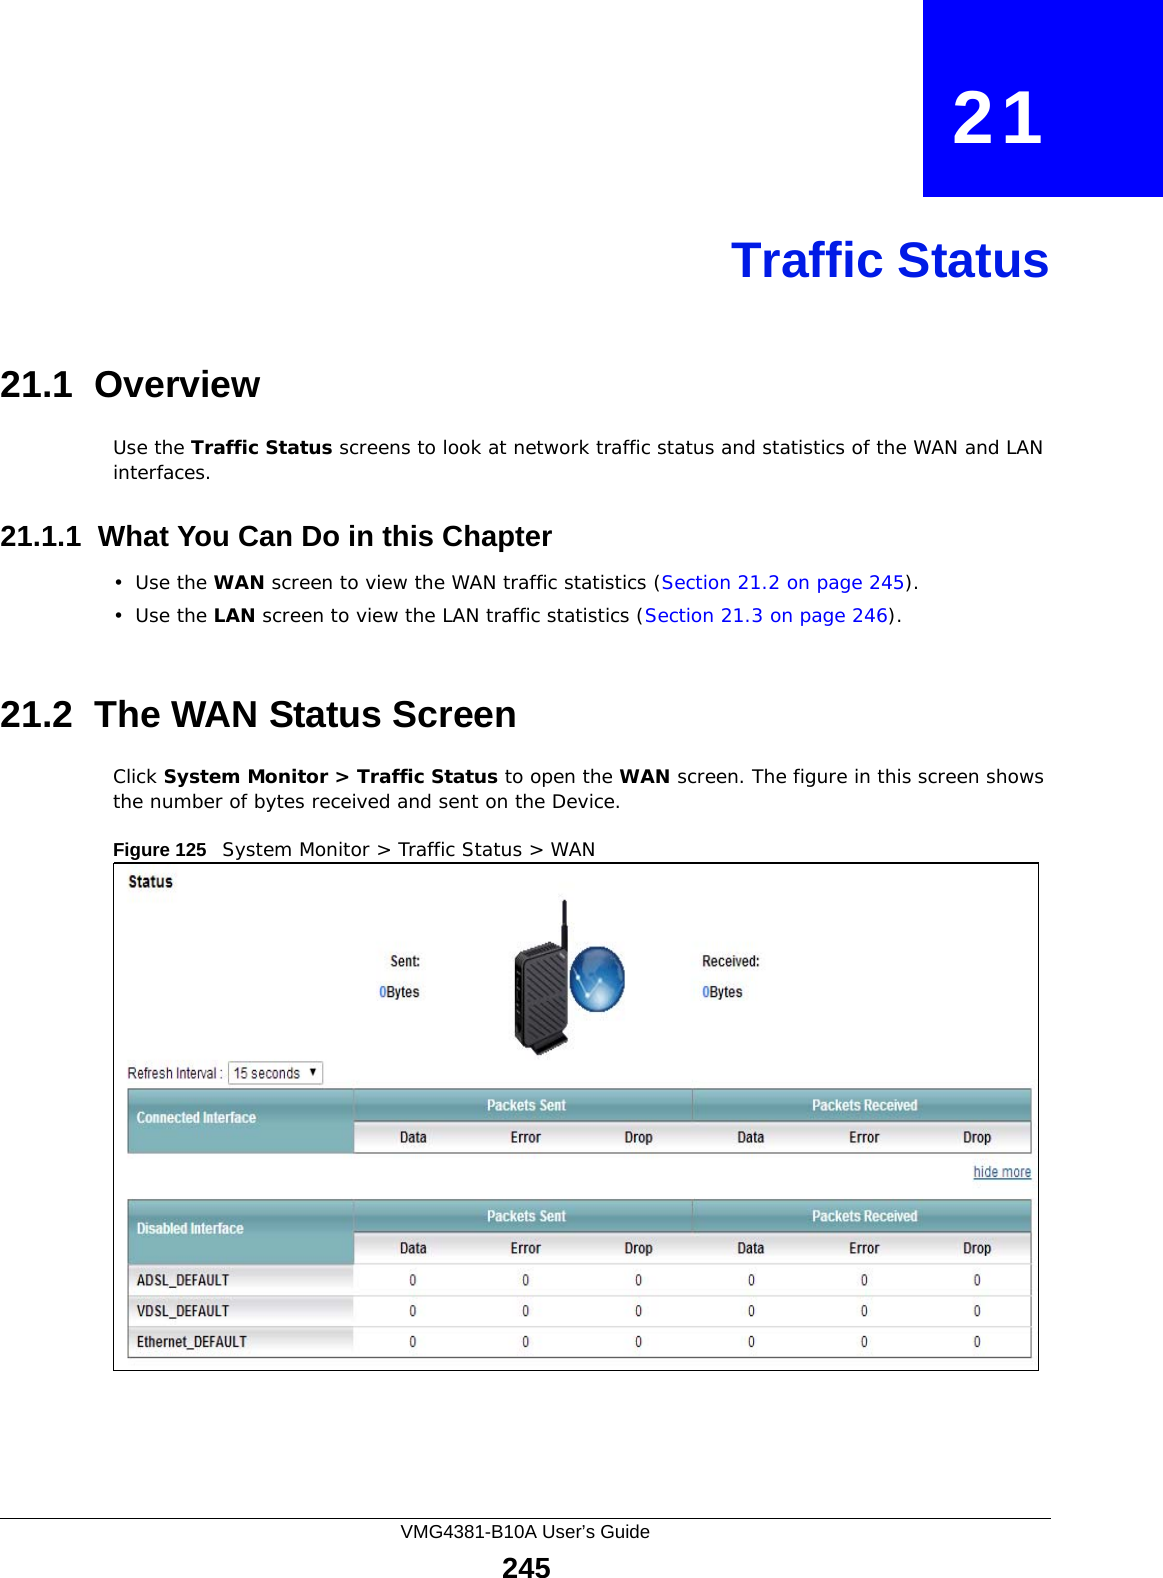 VMG4381-B10A User’s Guide245CHAPTER   21Traffic Status21.1  OverviewUse the Traffic Status screens to look at network traffic status and statistics of the WAN and LAN interfaces. 21.1.1  What You Can Do in this Chapter•Use the WAN screen to view the WAN traffic statistics (Section 21.2 on page 245).•Use the LAN screen to view the LAN traffic statistics (Section 21.3 on page 246).21.2  The WAN Status Screen Click System Monitor &gt; Traffic Status to open the WAN screen. The figure in this screen shows the number of bytes received and sent on the Device.Figure 125   System Monitor &gt; Traffic Status &gt; WAN